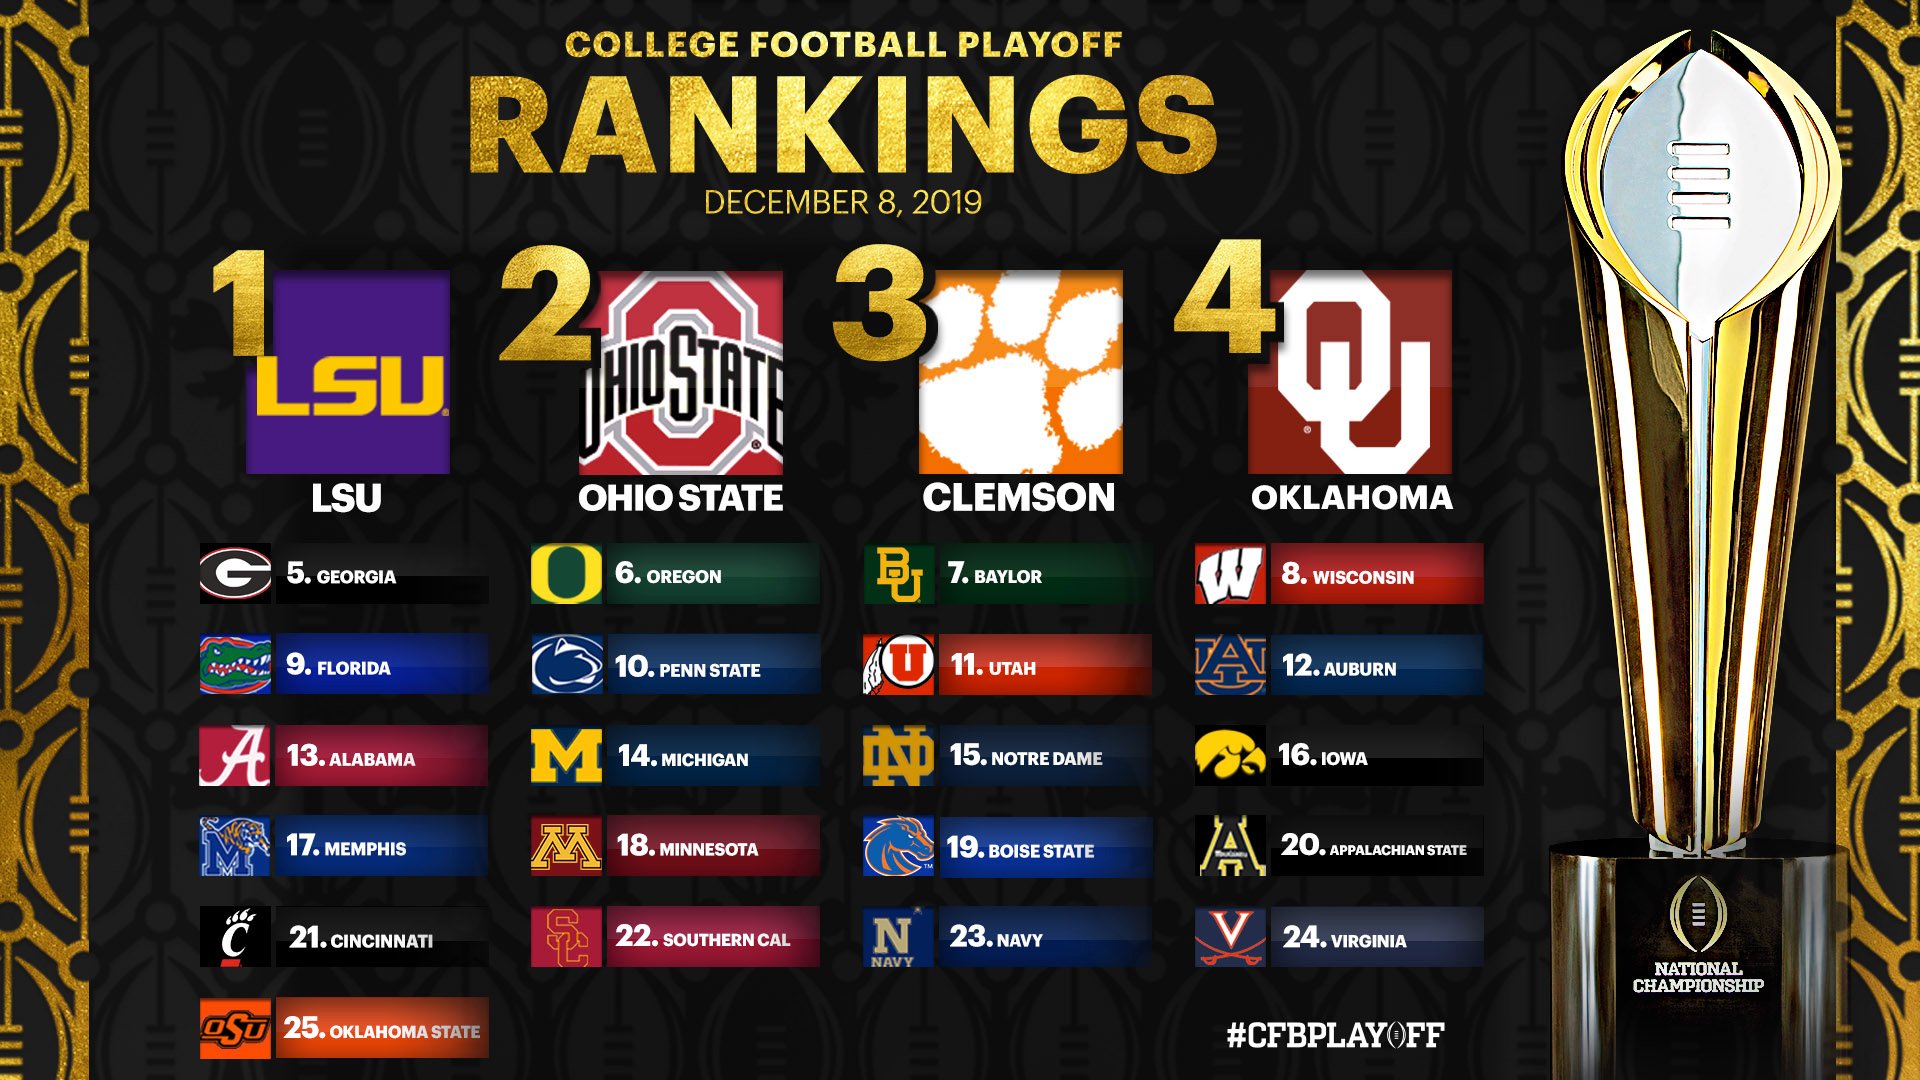 Final College Football Playoff Rankings